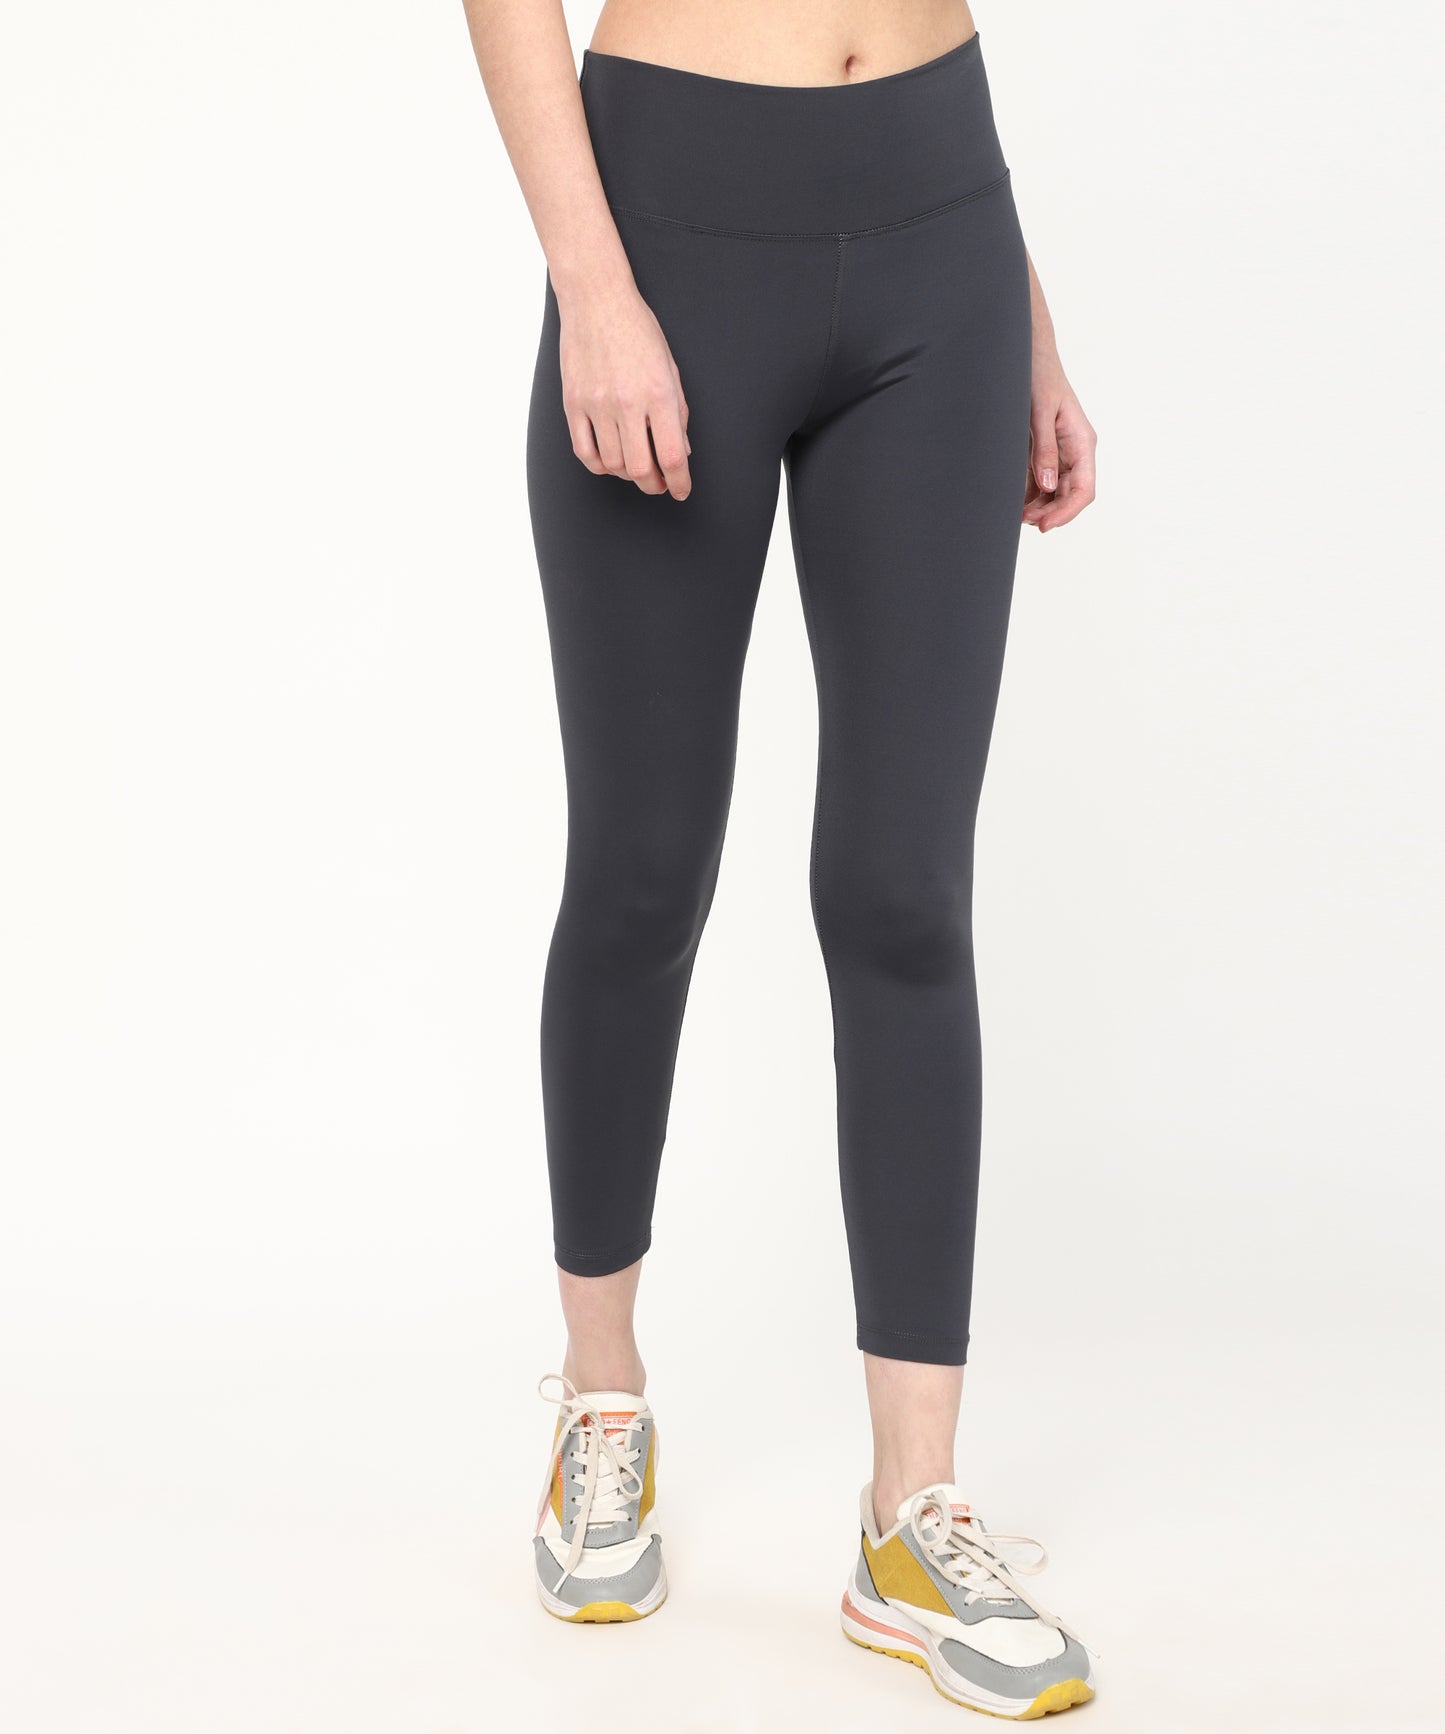 The Ultimate Stretchable Jeggings-Super-High Waisted Elastic Jeggings Yogapants Ankle Length(Grey)